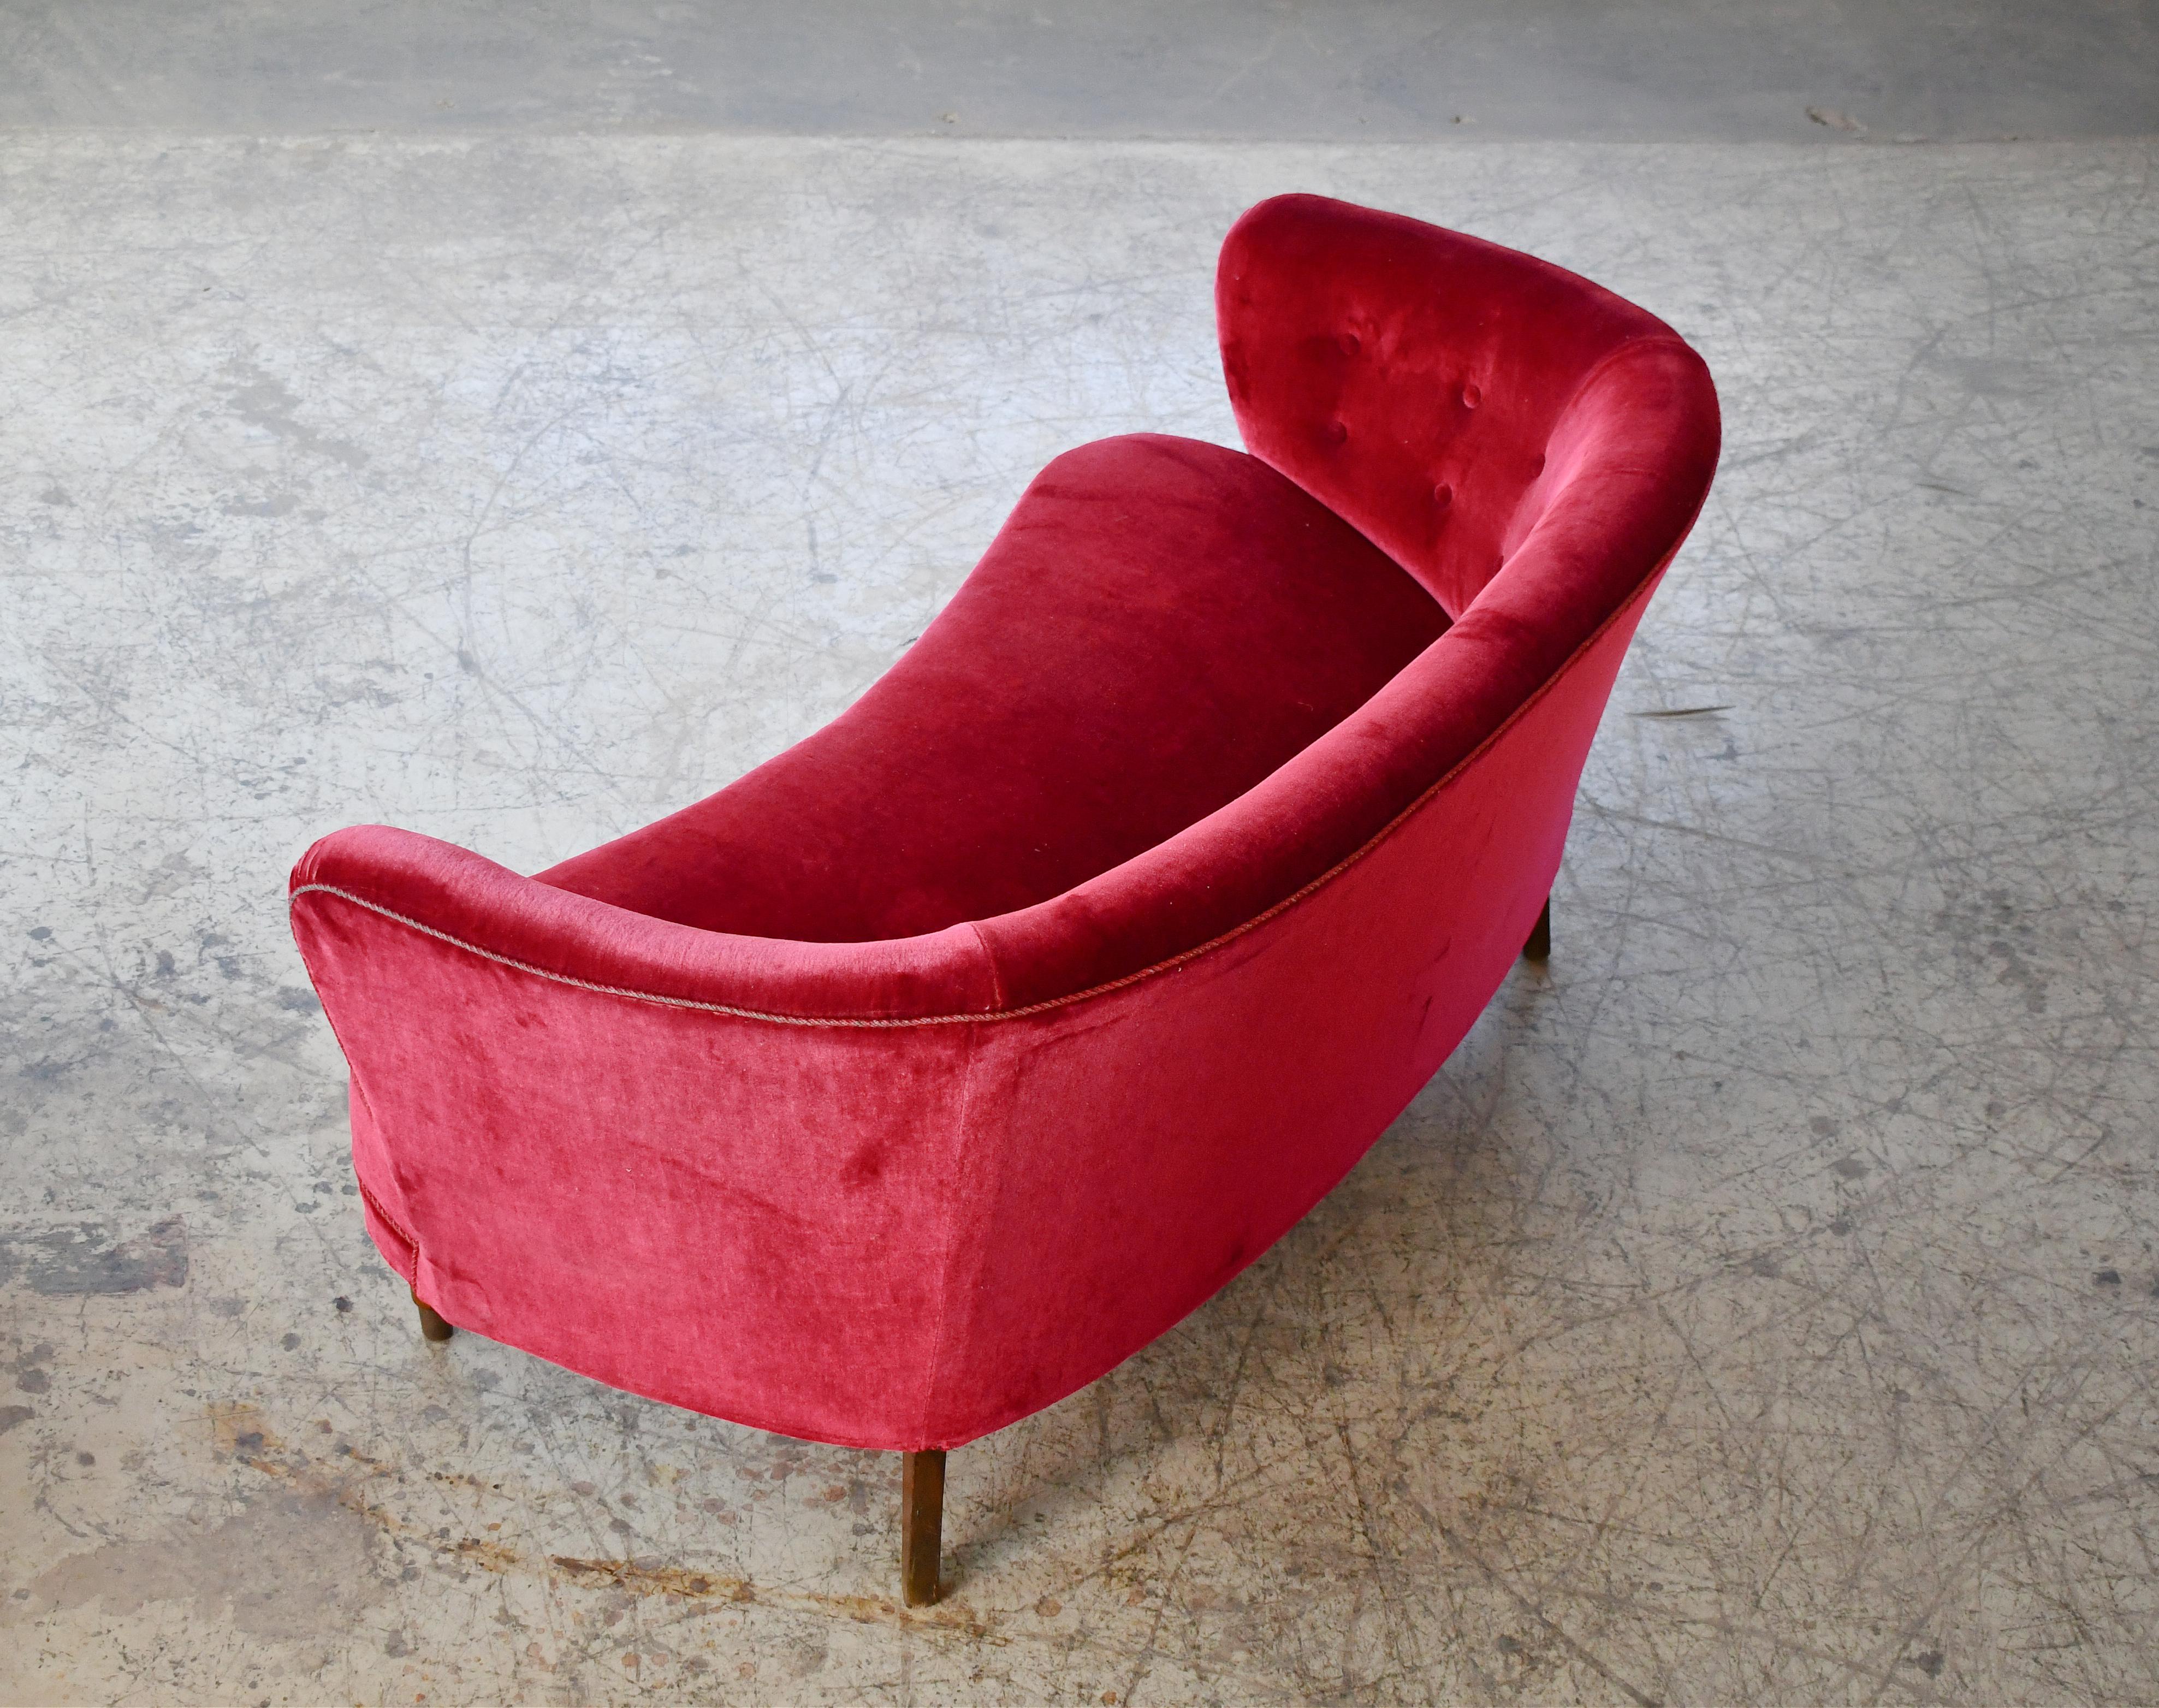 Mid-20th Century Danish Banana Form Curved Sofa or Loveseat Early 1950s For Sale